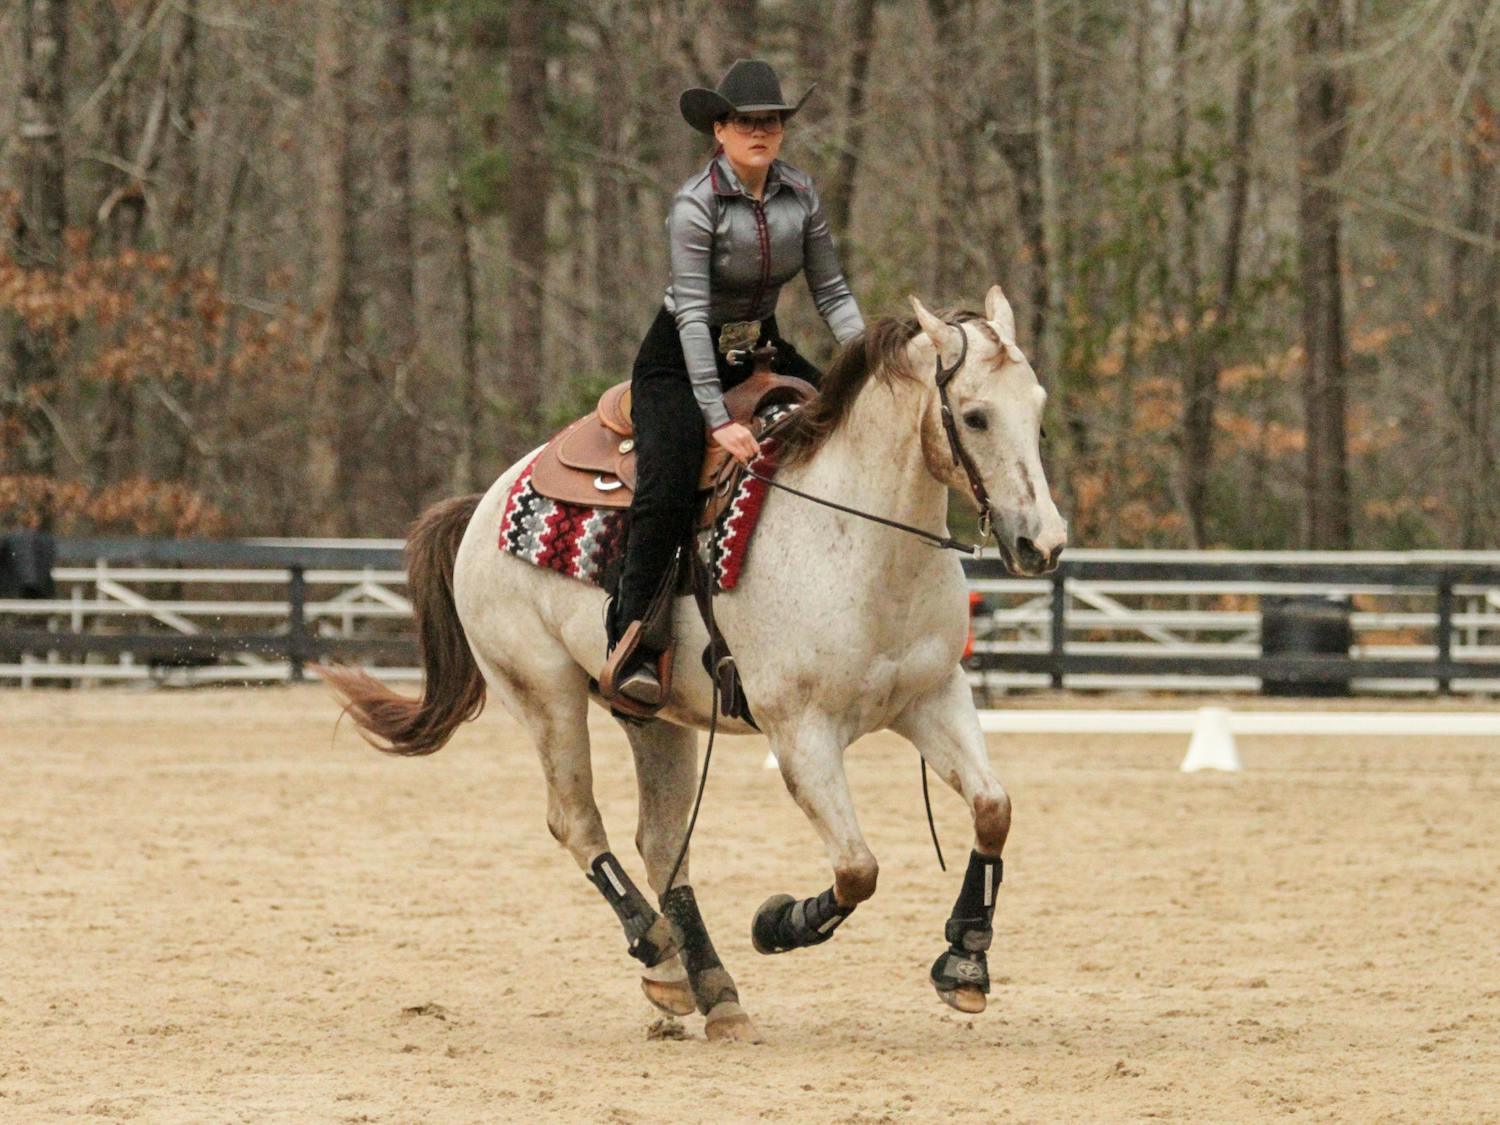 Senior Claire Pound, mounted on Paddy, demonstrates the pattern for the reigning category during the meet against Texas A&amp;M at One Wood Farm on Feb. 11, 2023. Pound, who has been showing horses from a young age, said that her teammates are what she will miss the most about competing on the collegiate level. “We’re a pretty small team compared to other NCEA teams," Pound said. "I think its super special. We’re all just honestly like 36 best friends, and I’m going to miss them so much, I can’t even explain it.”